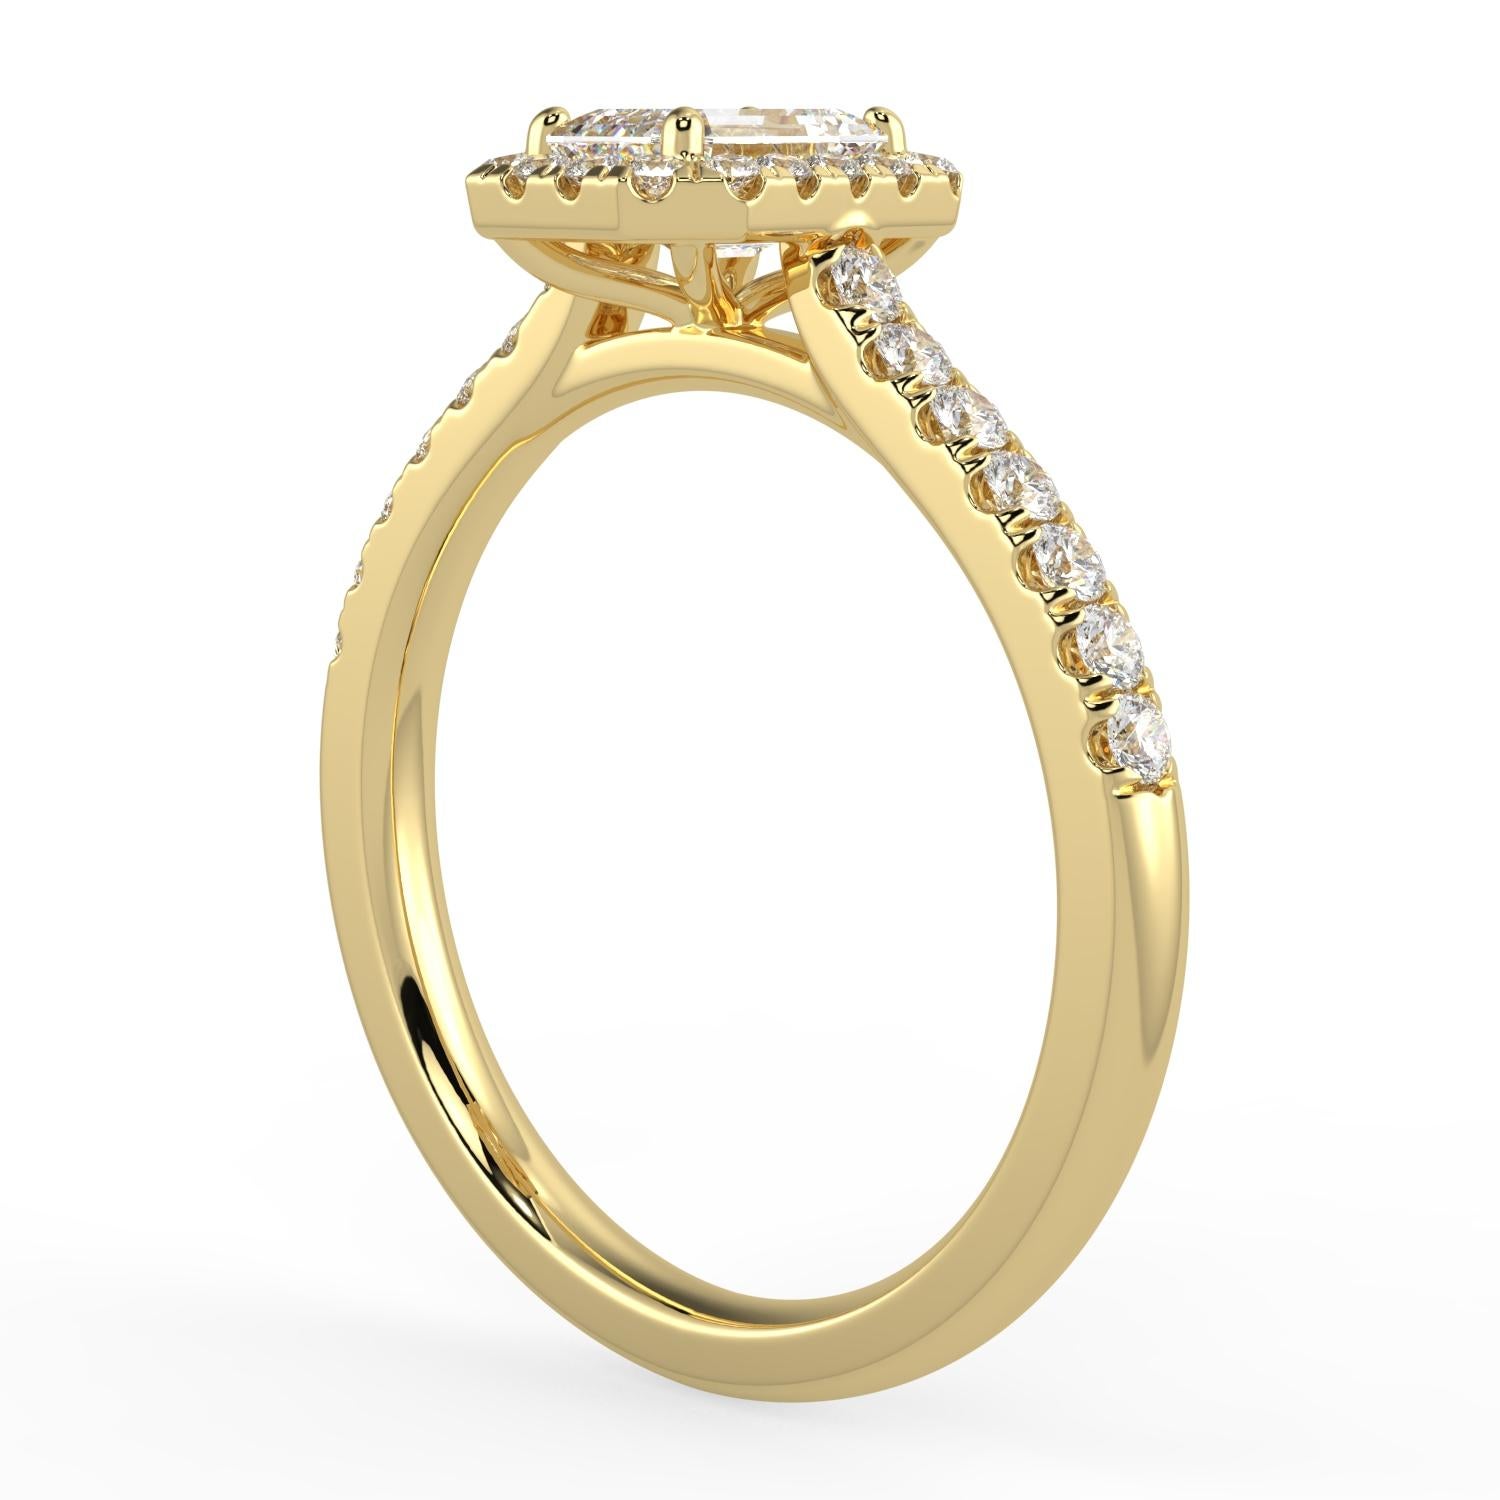 AAMIAA DIAMOND RING
1ct Natural Diamond G-H Color SI Clarity Perfect Design Shape Halo Fashion Stunning Promise Ring 14K Yellow Gold
Specification:
Brand: Aamiaa
Metal: Yellow Gold
Metal Purity: 14k
Center Diamond Shape: Emerald
Design: Halo
Center